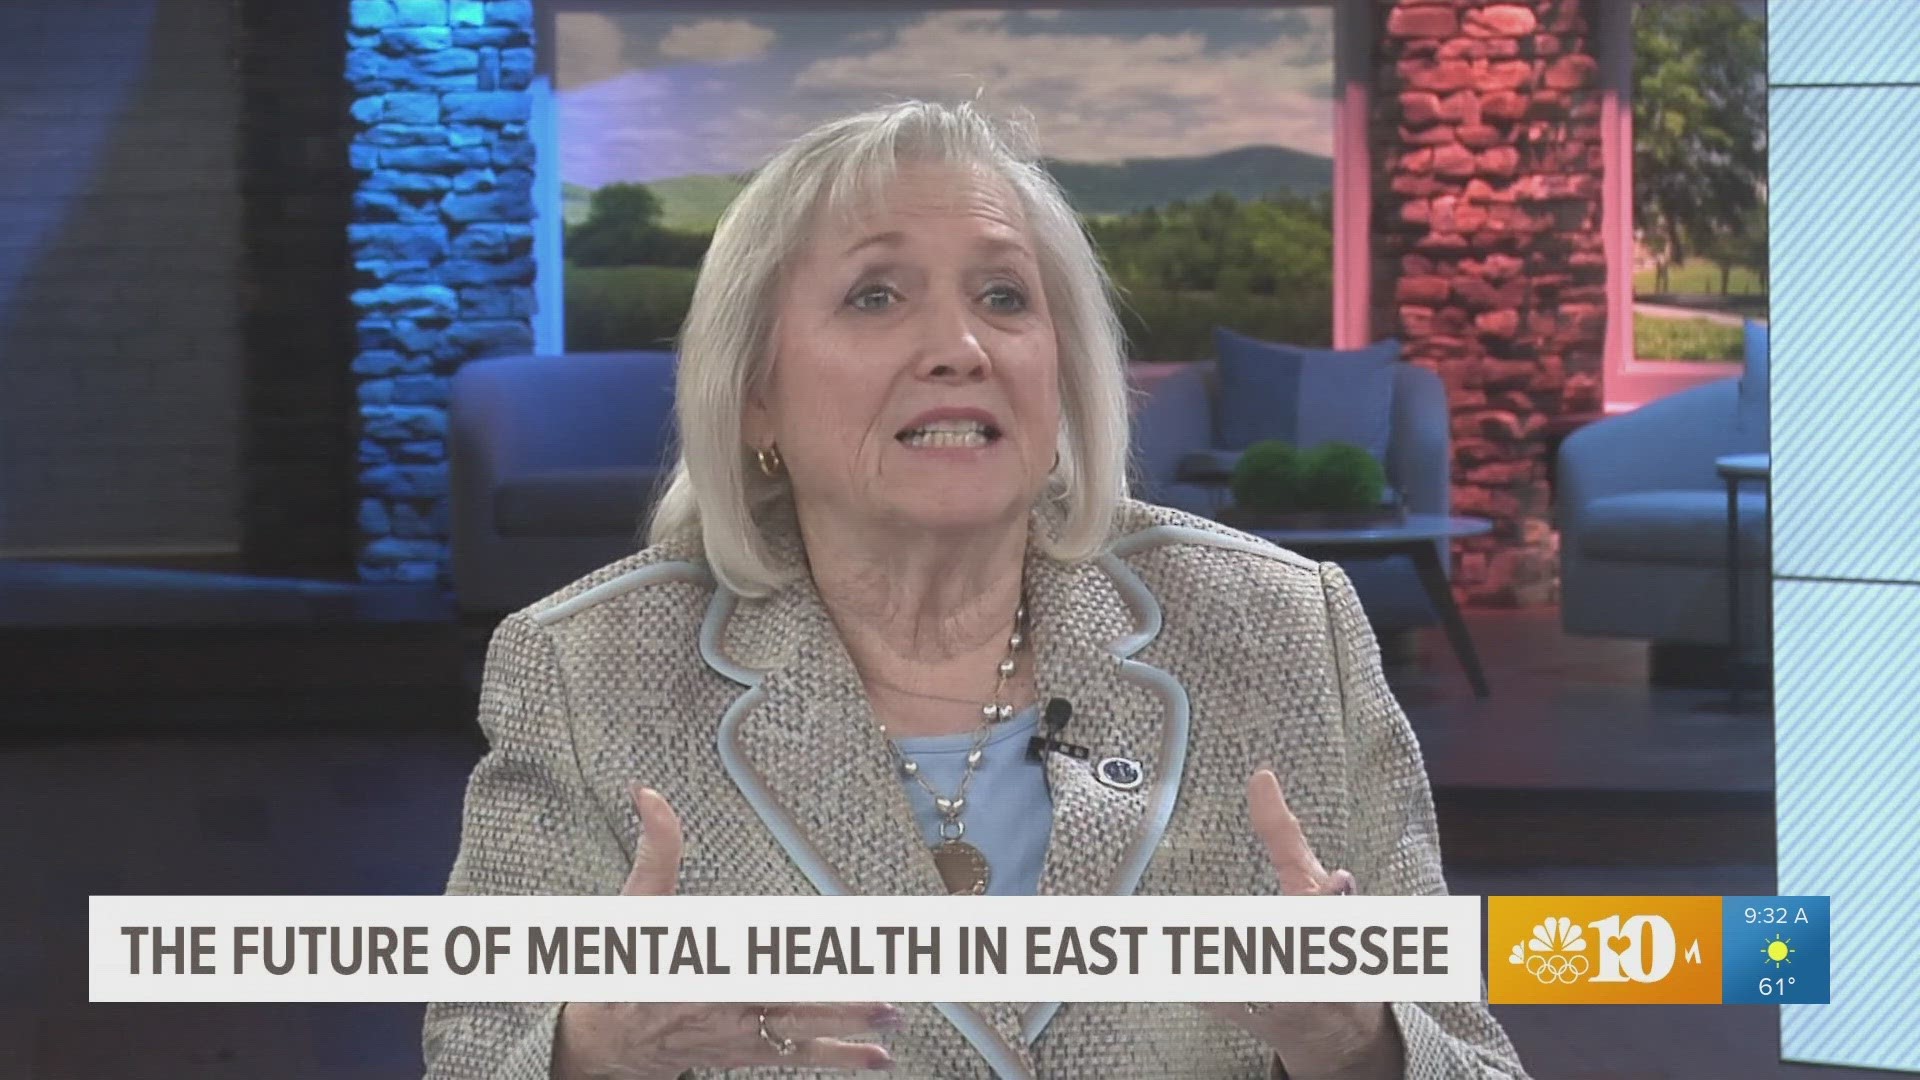 State Sen. Becky Duncan Massey talks about the need for an in-patient mental health center among other topics.